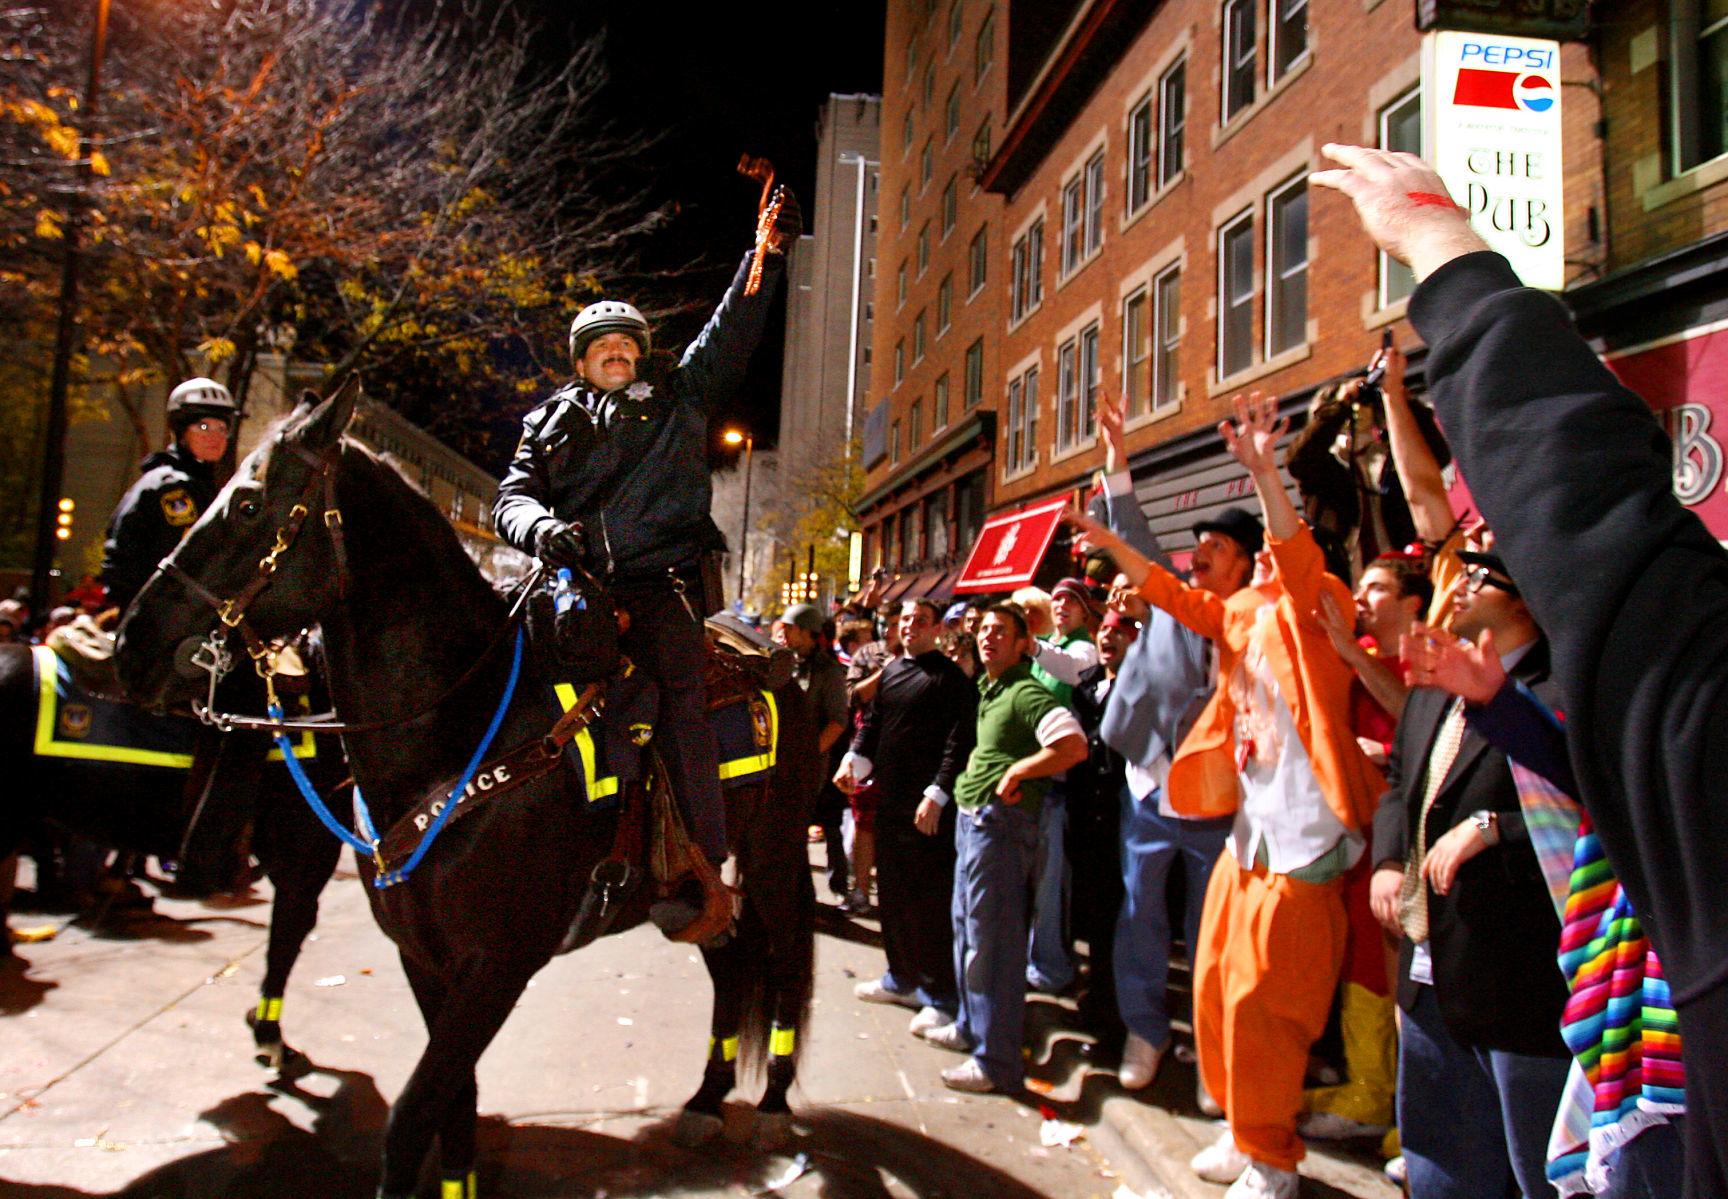 Without Freakfest, Madison braces for Halloween eve and UW